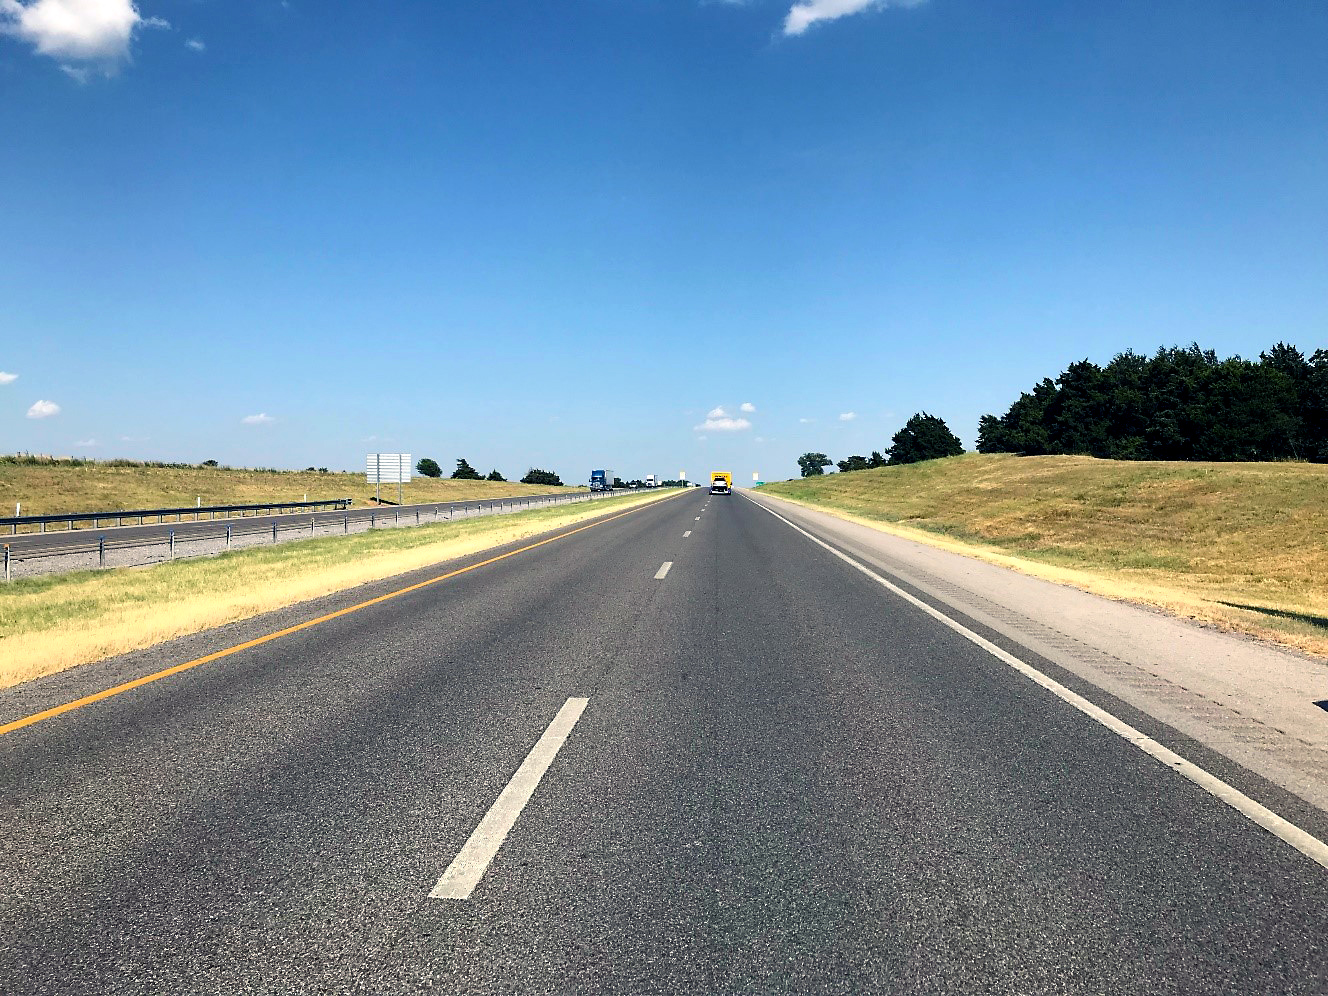 Photo of I-40 highway in Oklahoma that received a mill and overlay with HiMA in 2012.